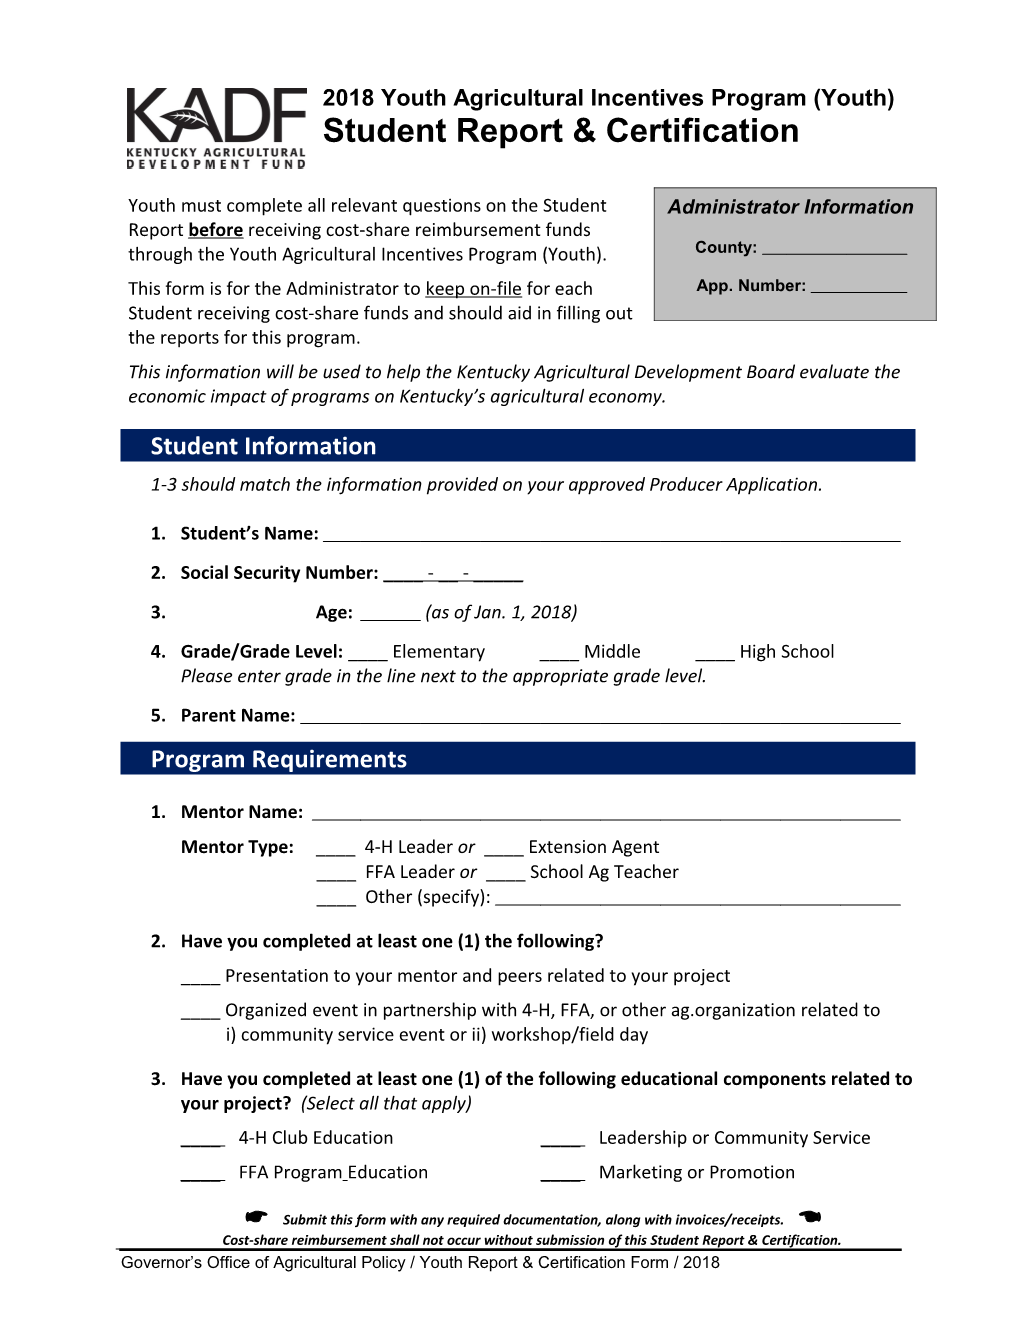 Youth 2018 Student Report & Certification Form